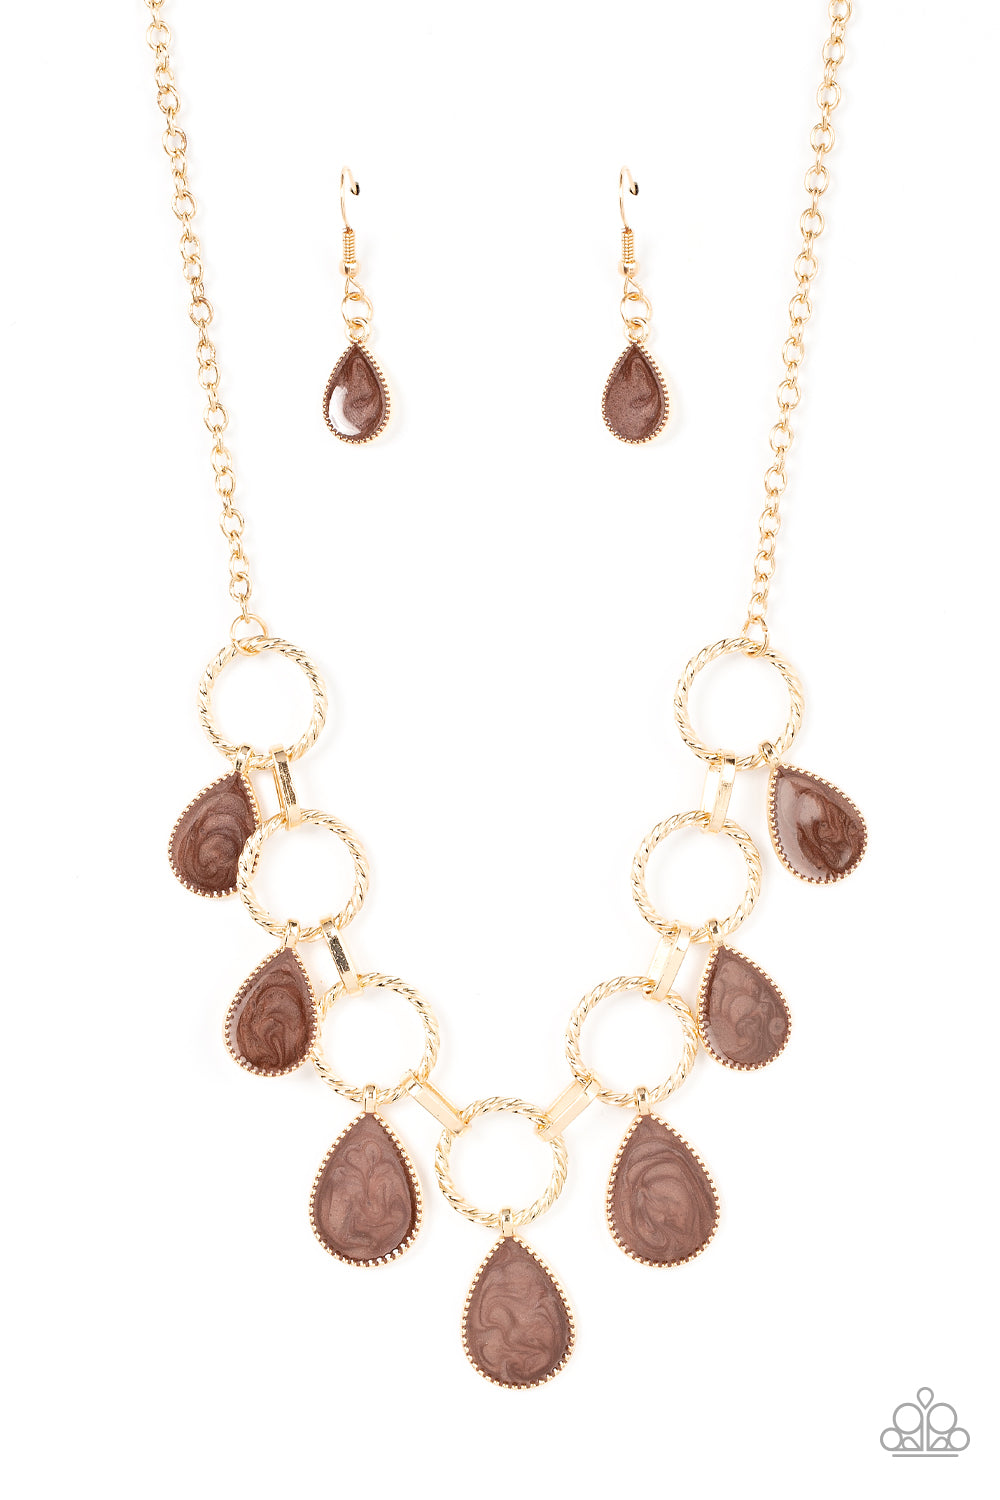 Paparazzi Necklaces - Golden Glimmer - Brown